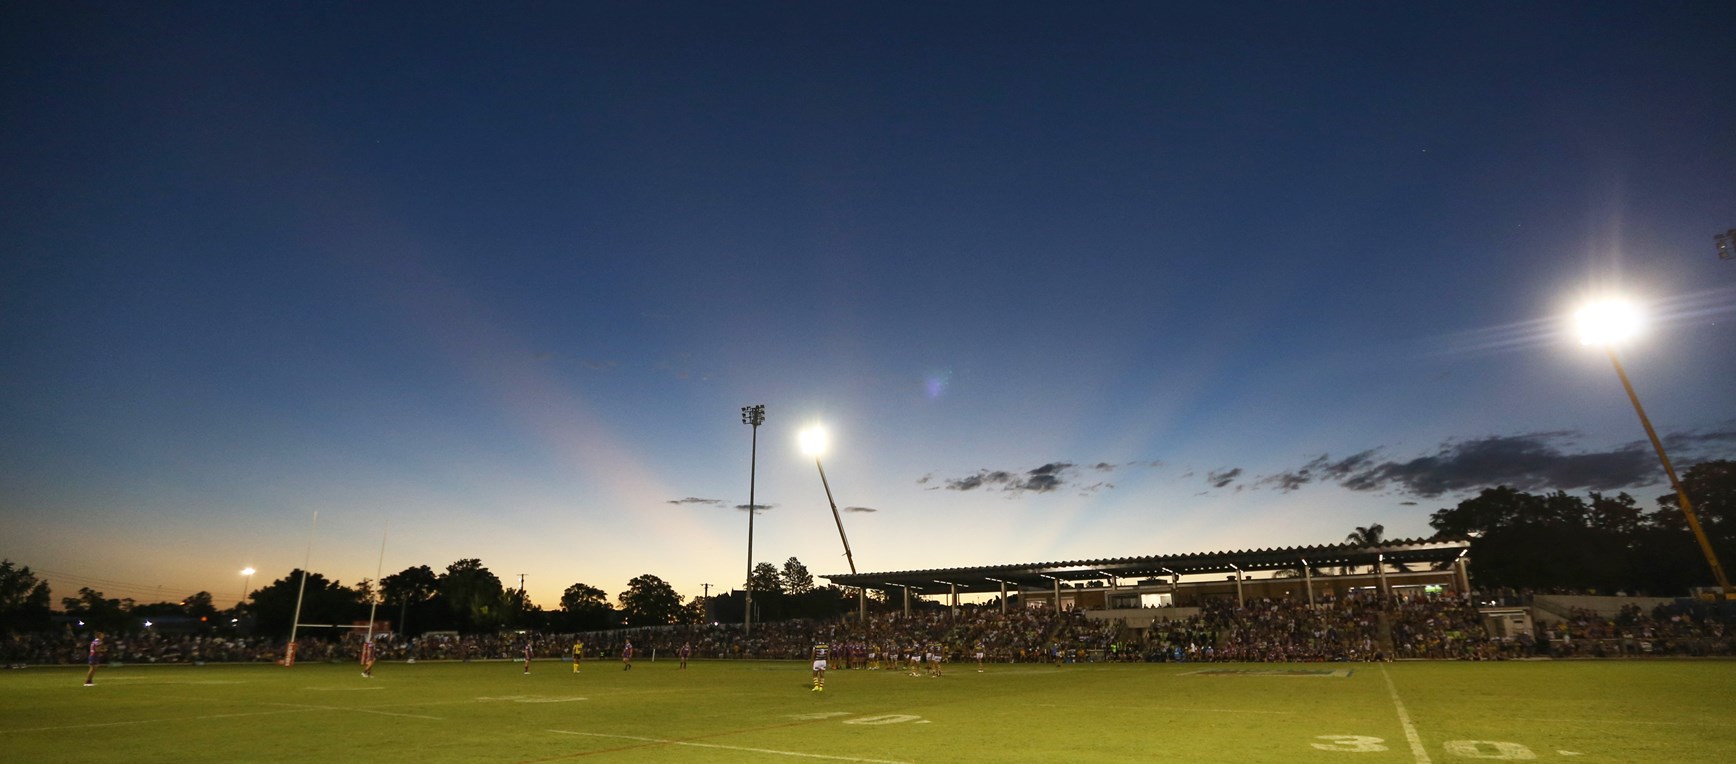 Gallery: game day at No.1 Sportsground